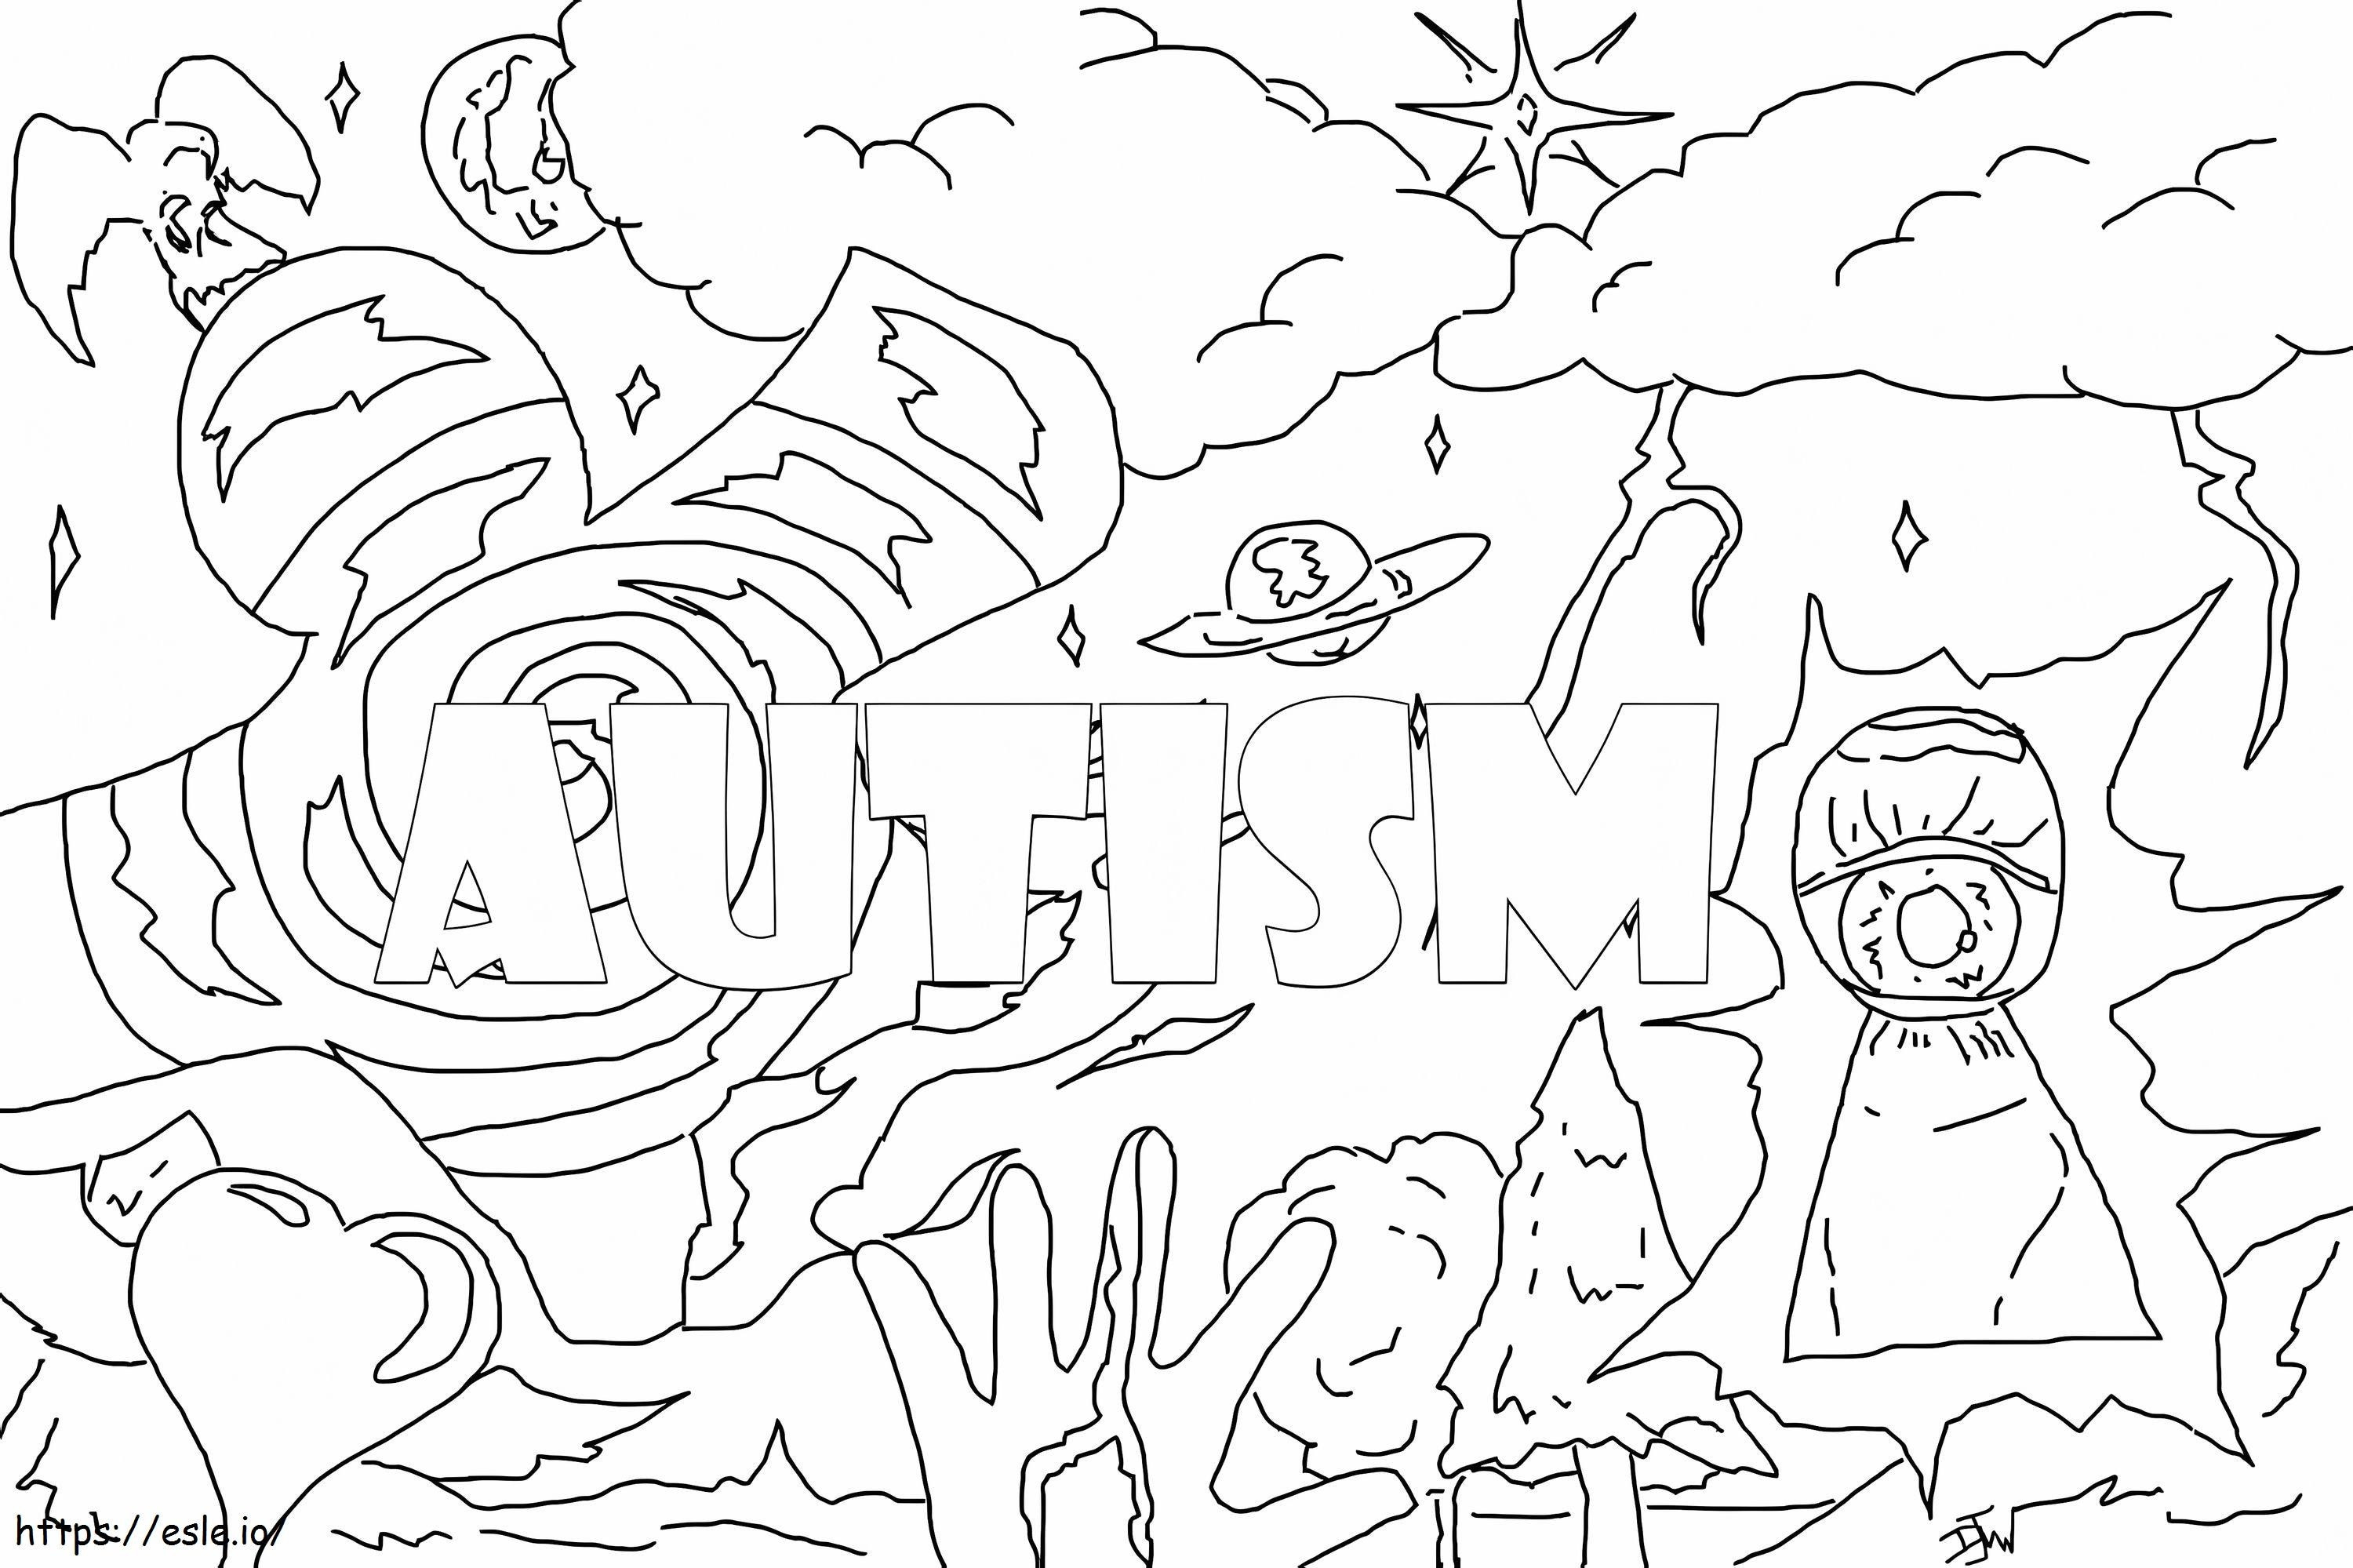 Autism Awareness Day coloring page